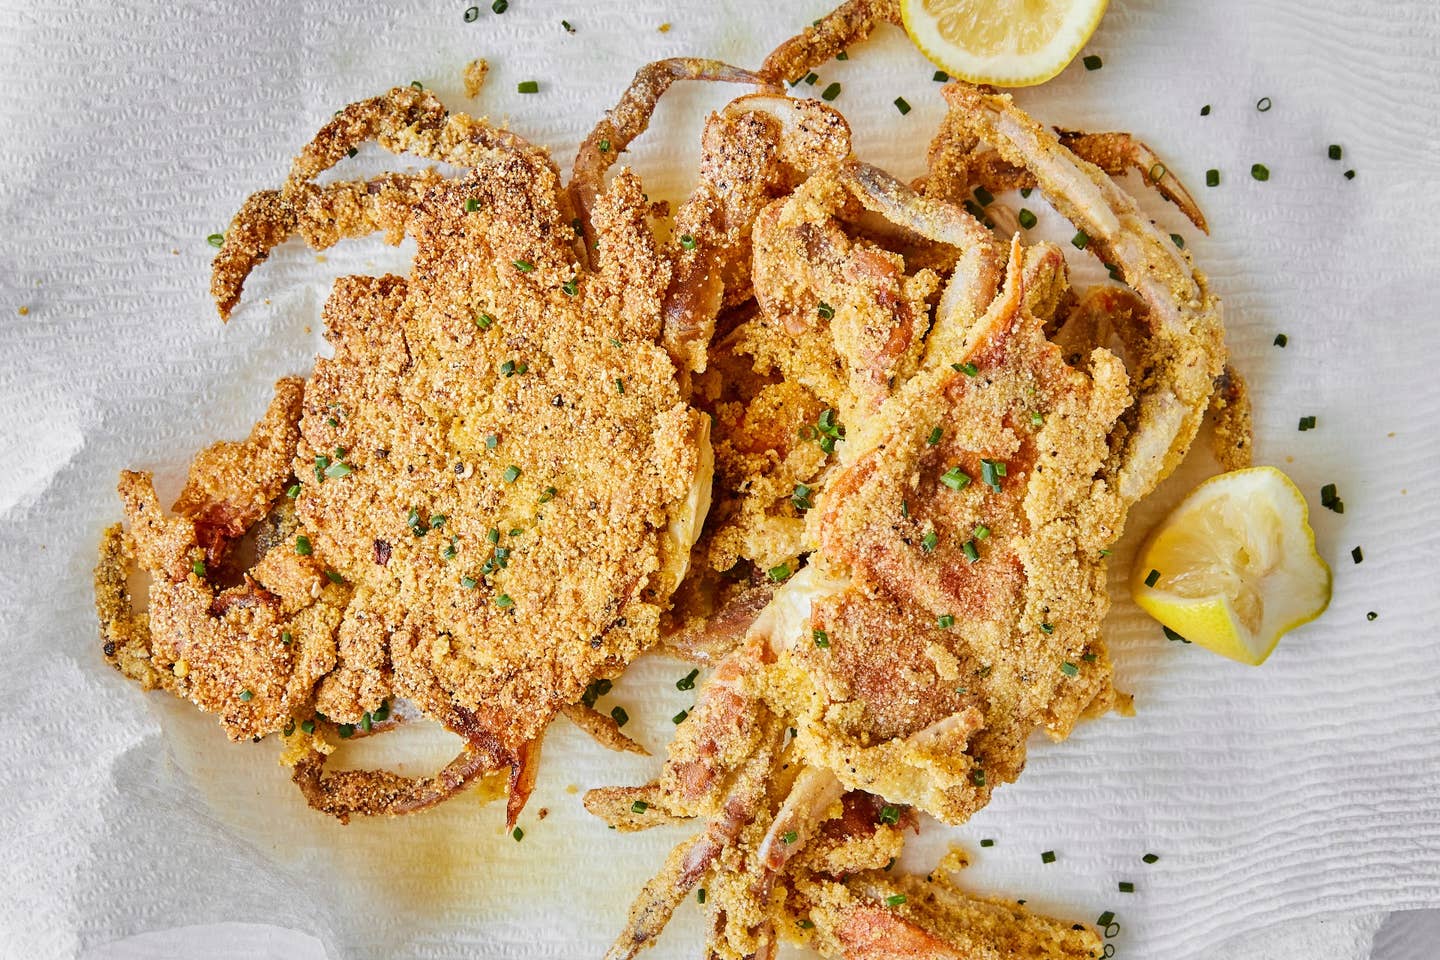 Cooked Soft Shell Crab Recipe